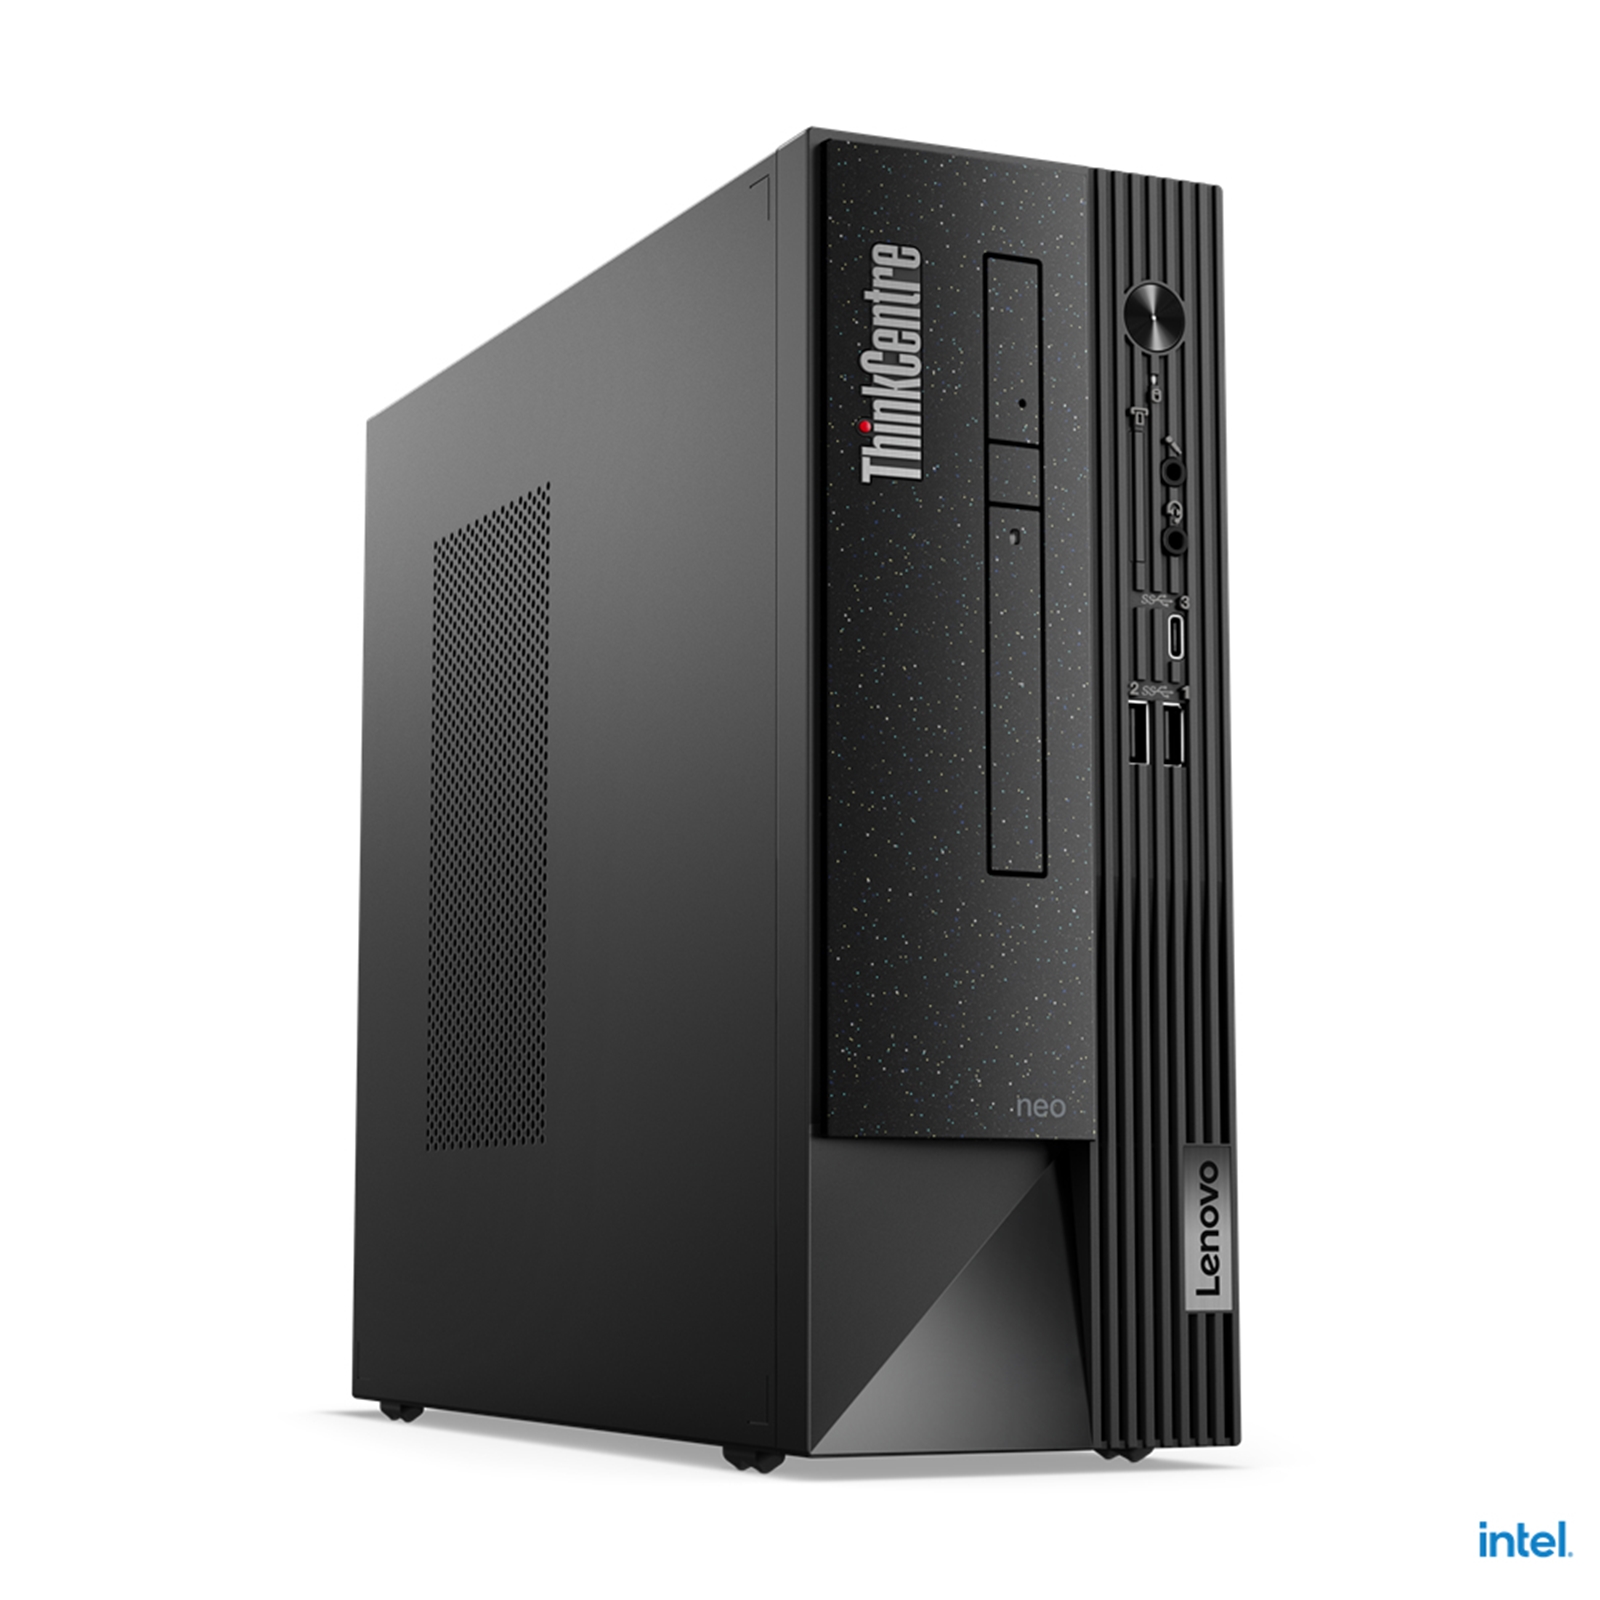 Lenovo ThinkCentre neo 50s 11T000F7UK Small Form Factor PC, Intel Core i5-12400 12th Gen, 8GB RAM, 256GB SSD, Windows 11 Pro with Keyboard and Mouse